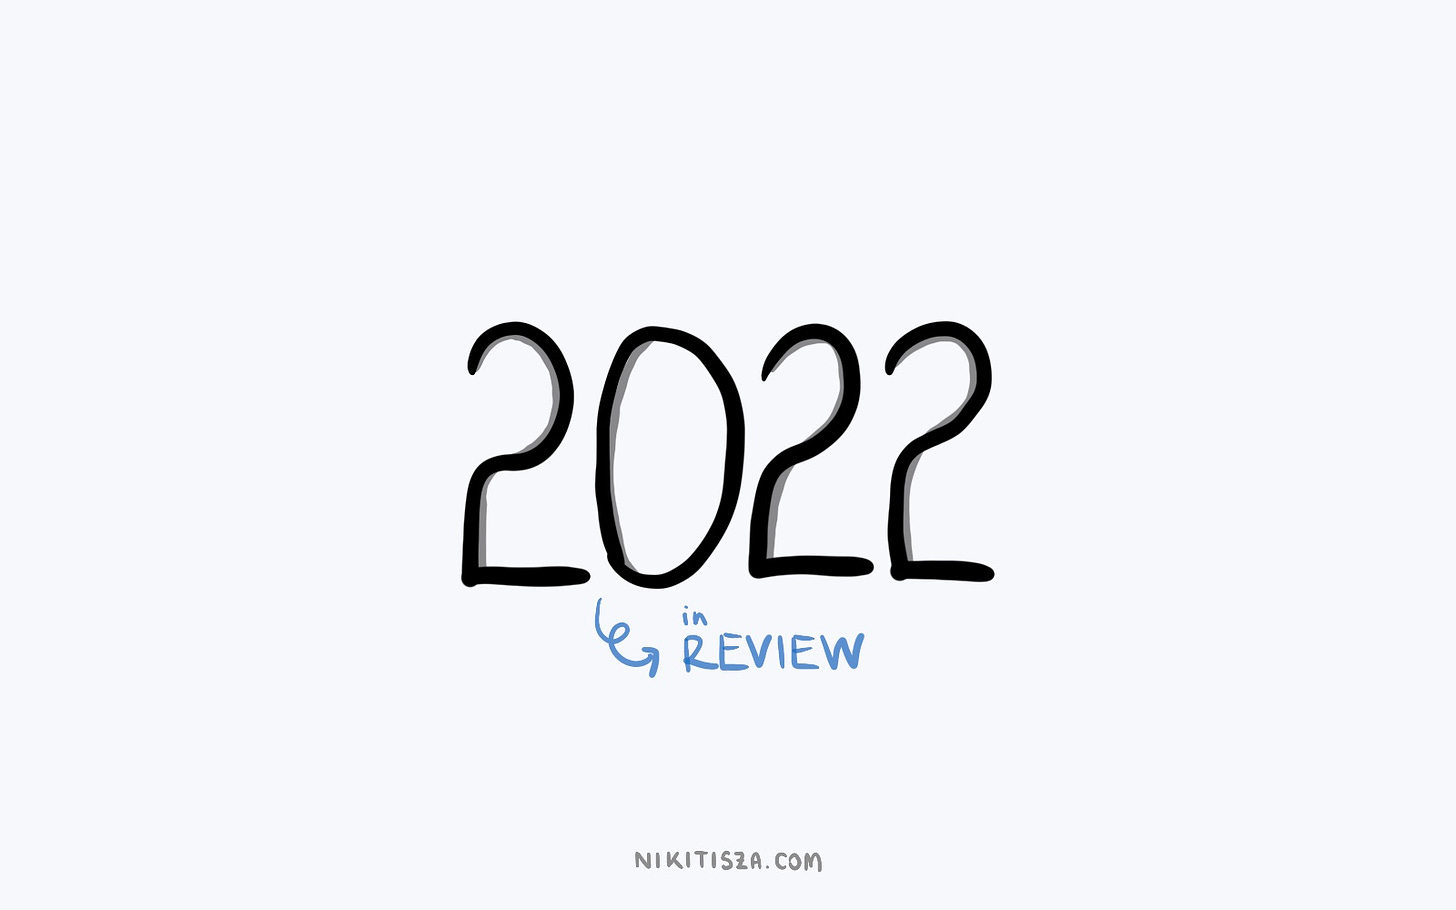 2022 end-of-year review — image by the author